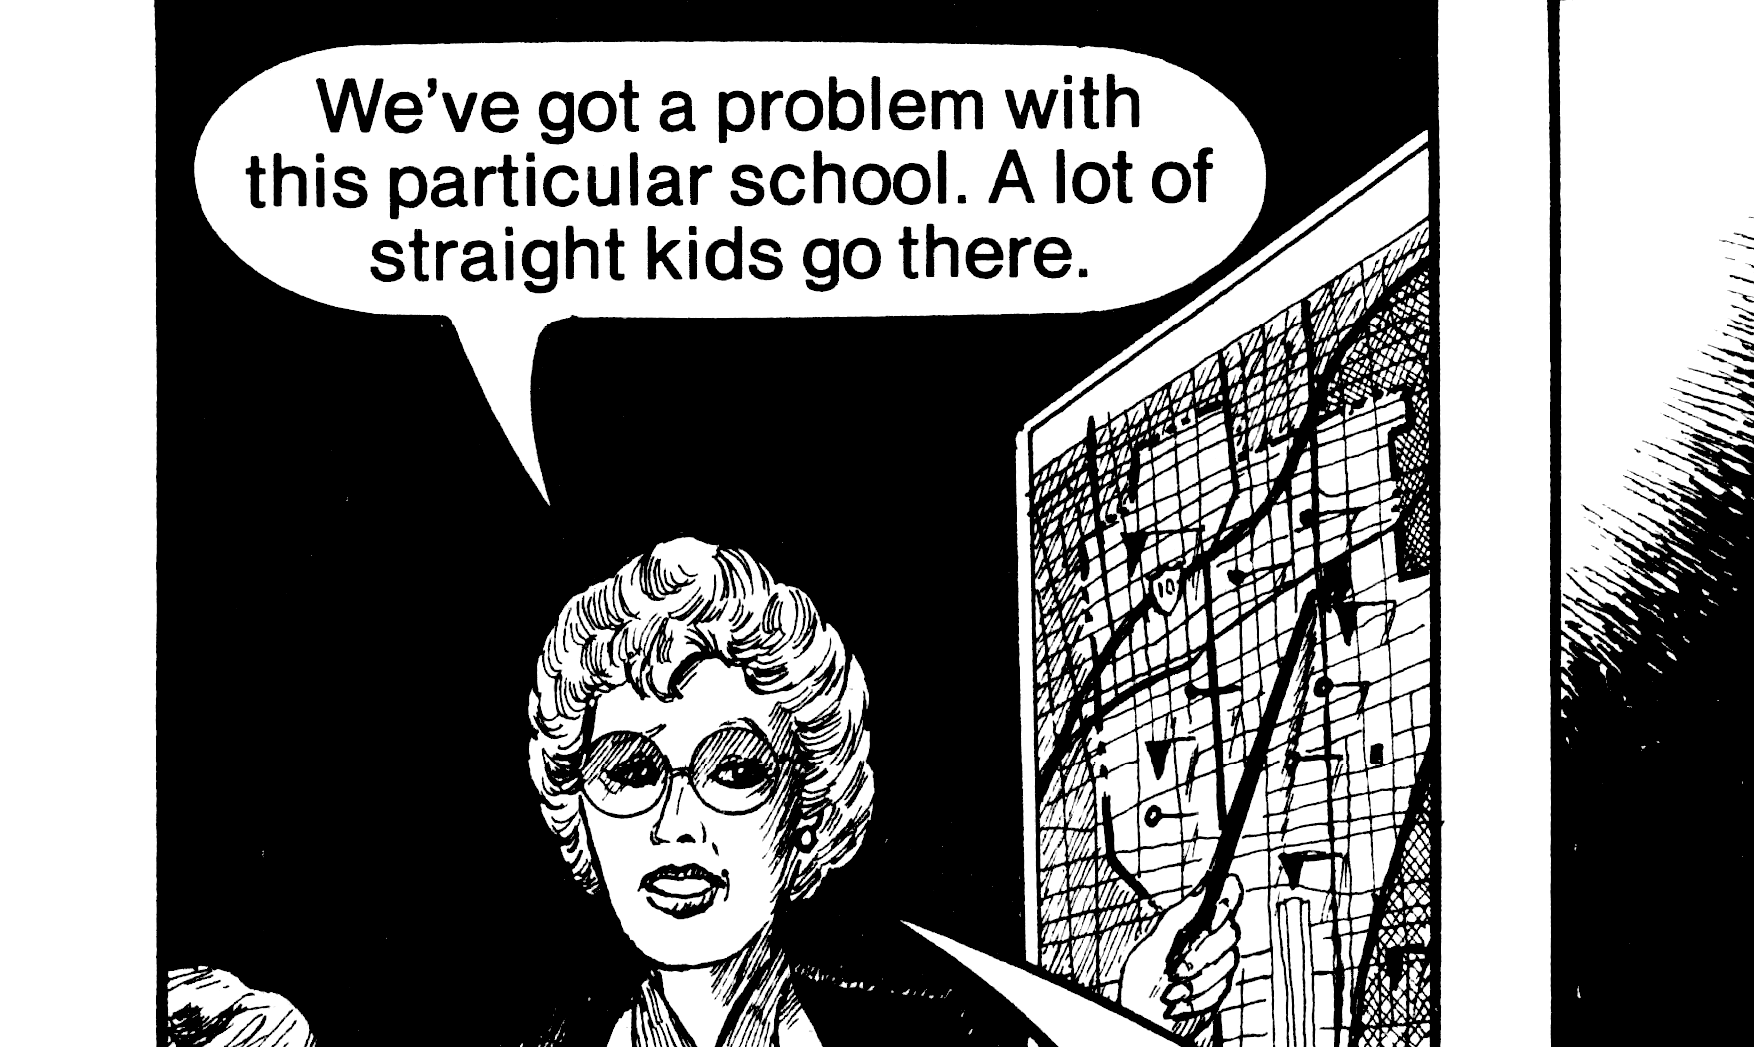 No Context Chick Tracts on Twitter.